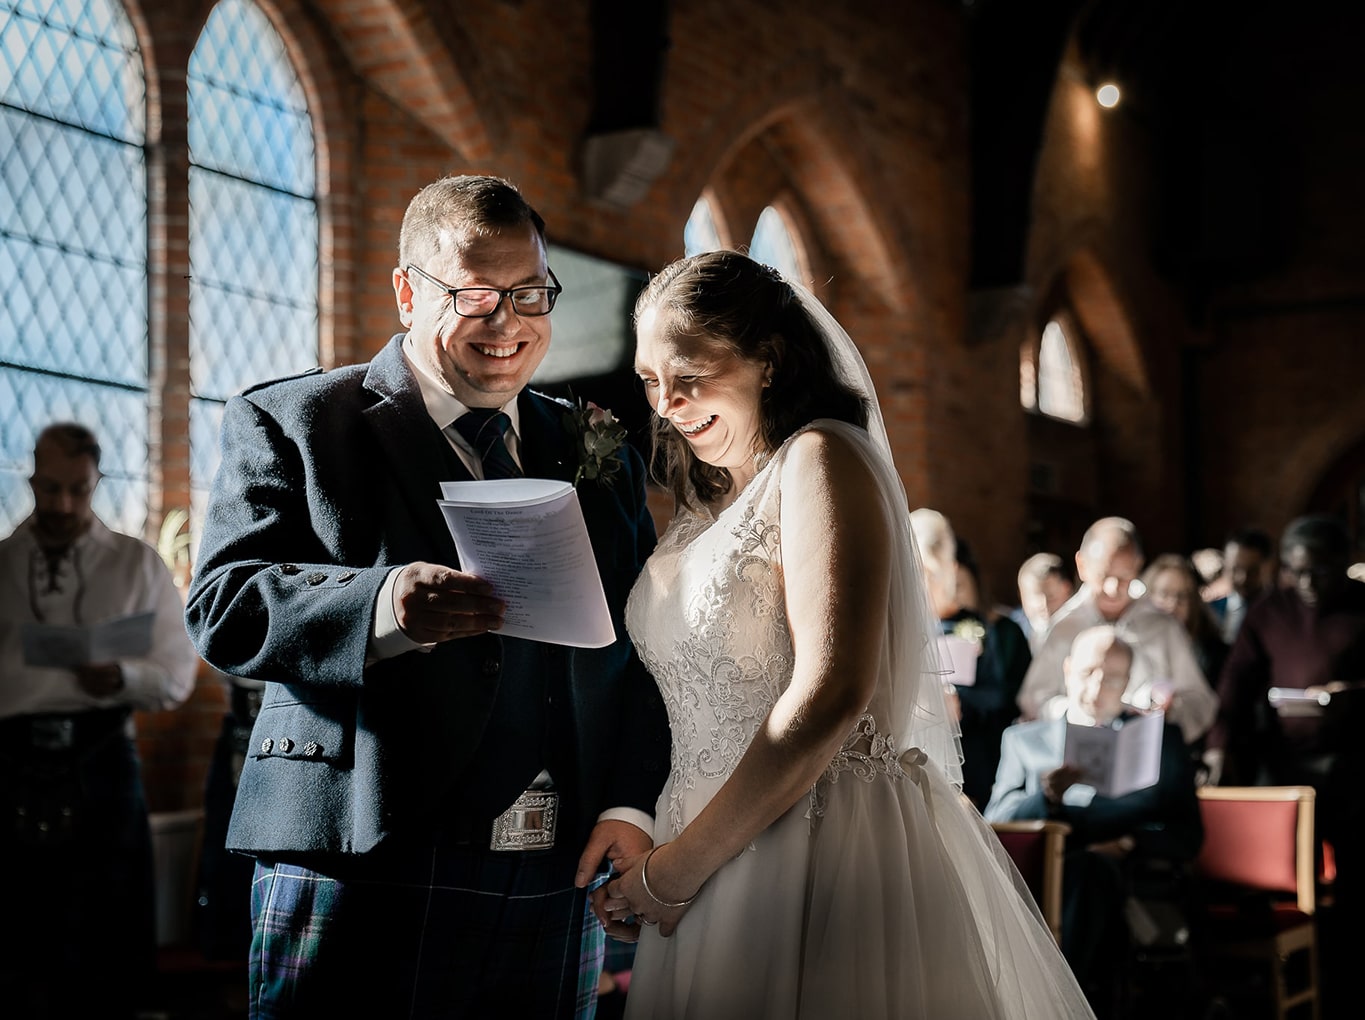 Bride and Groom holding hands and giggling during ceremony inside modern built church